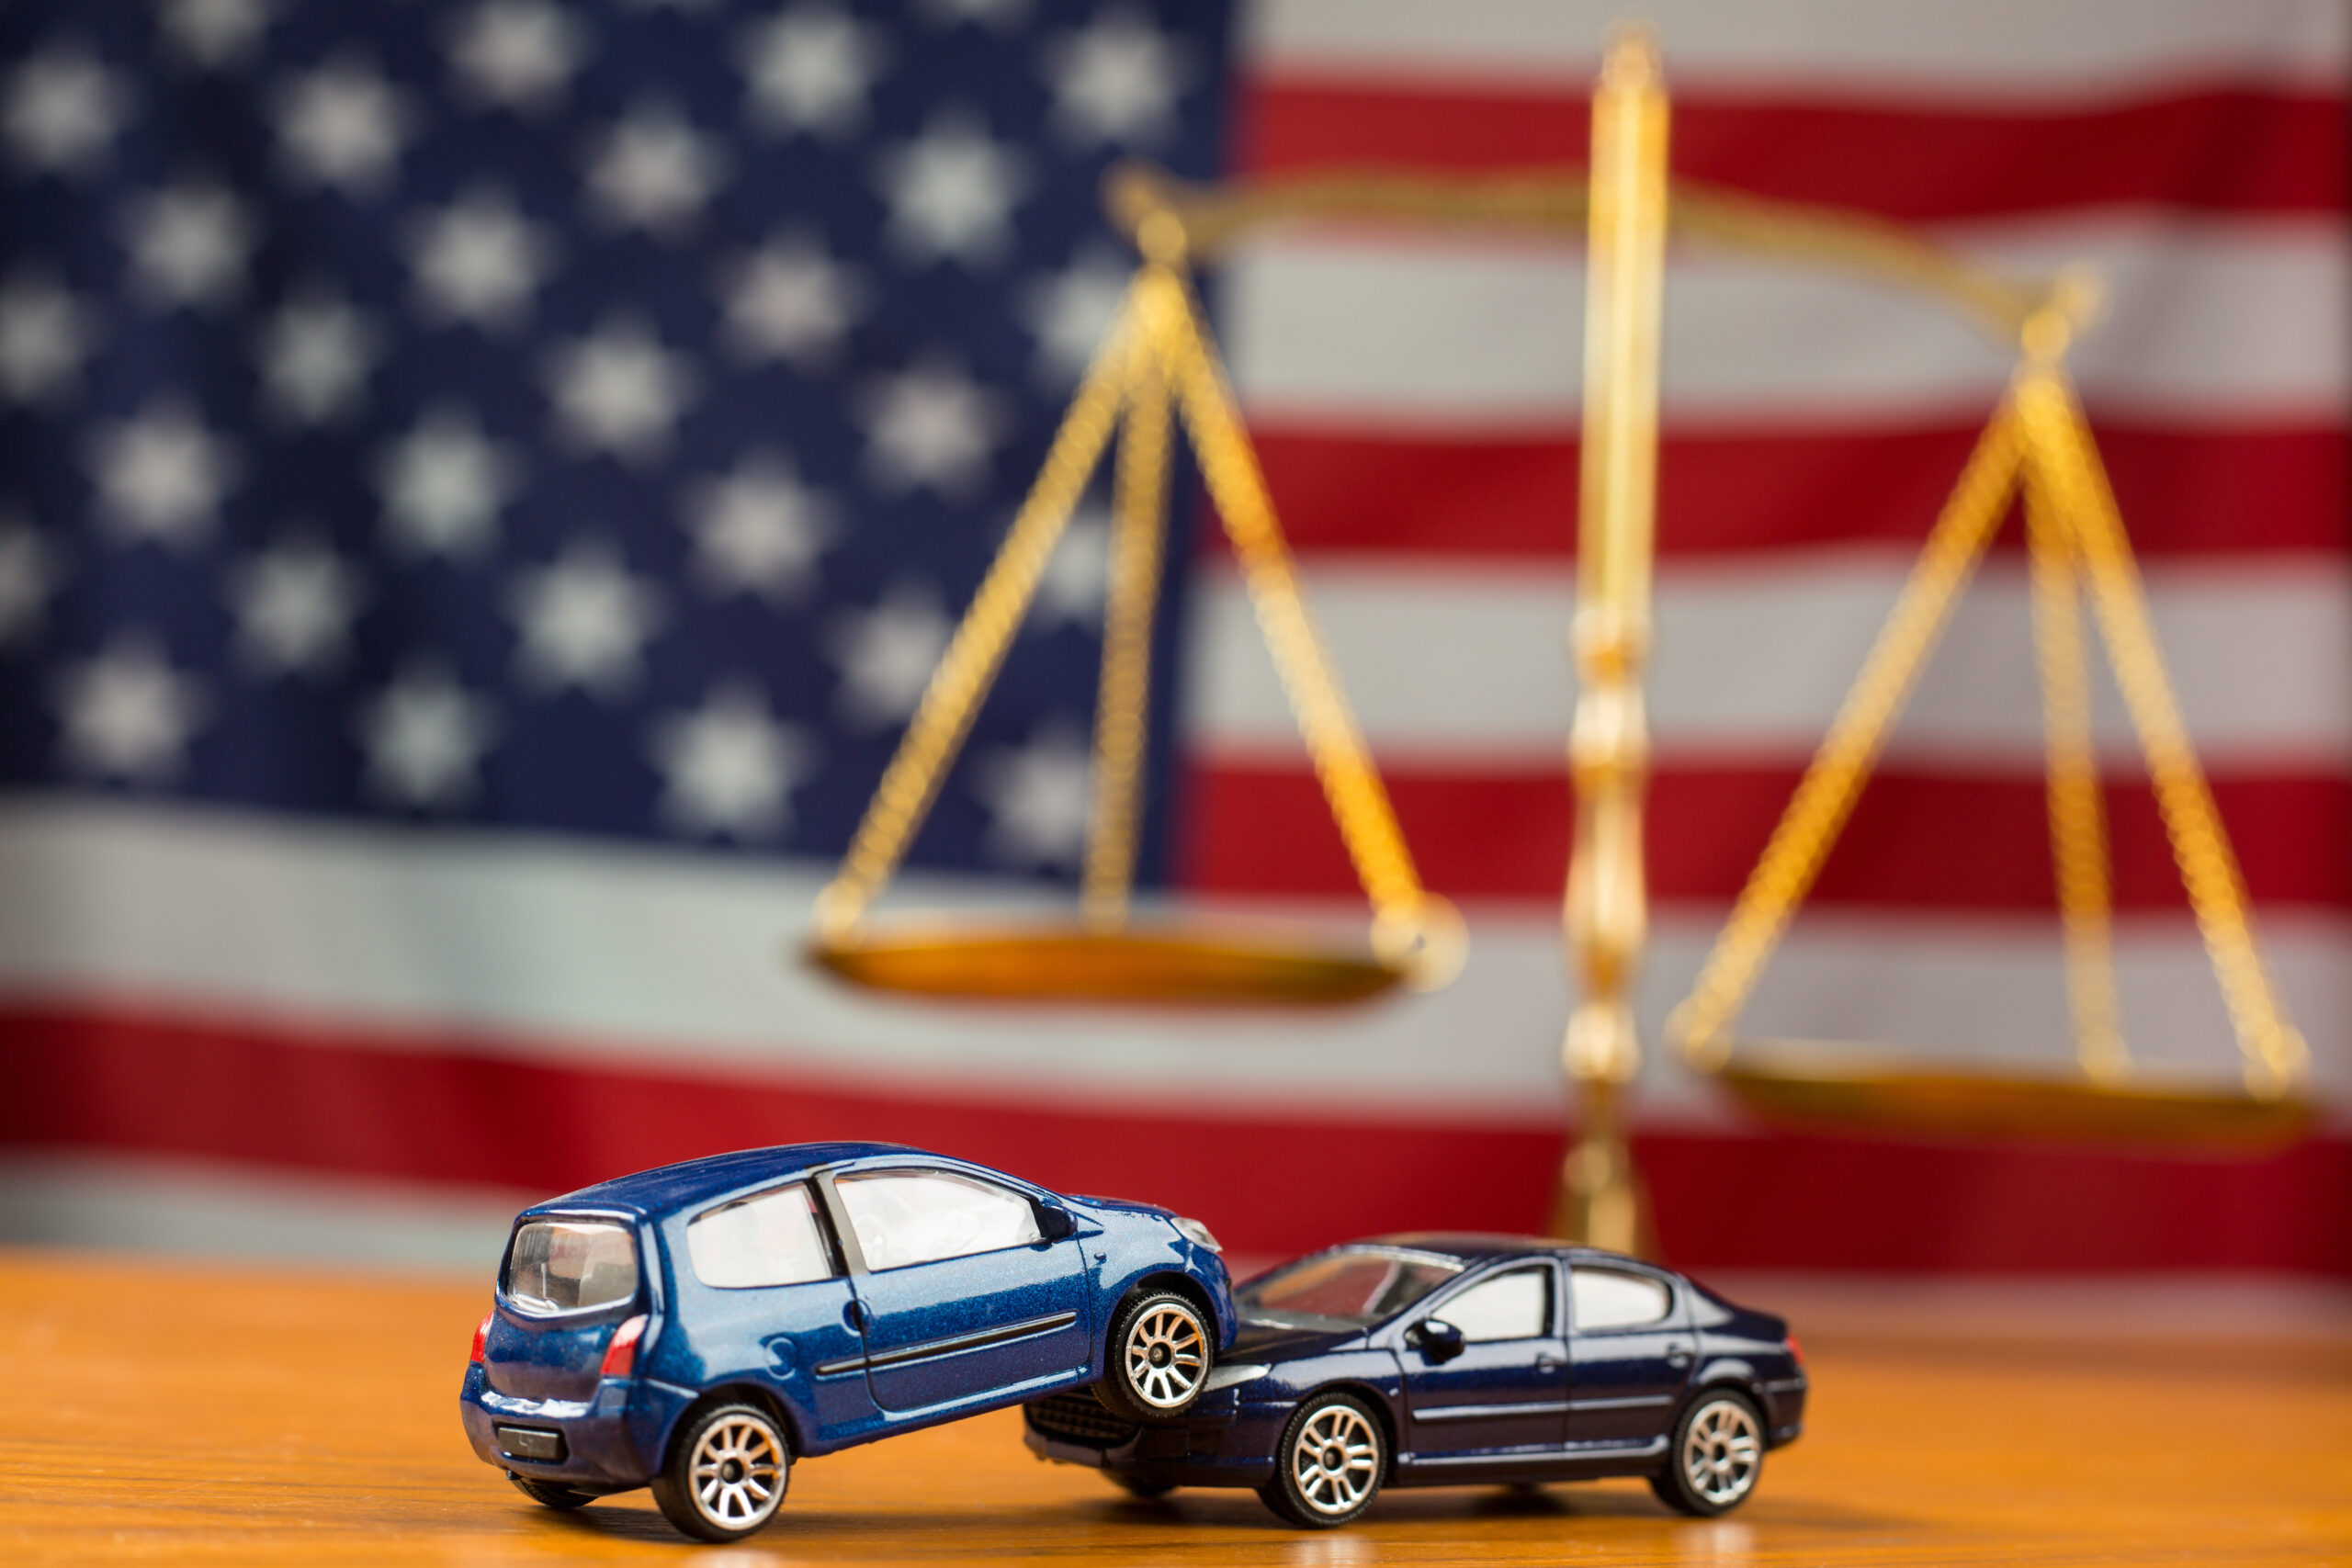 two cars on attorney's desk